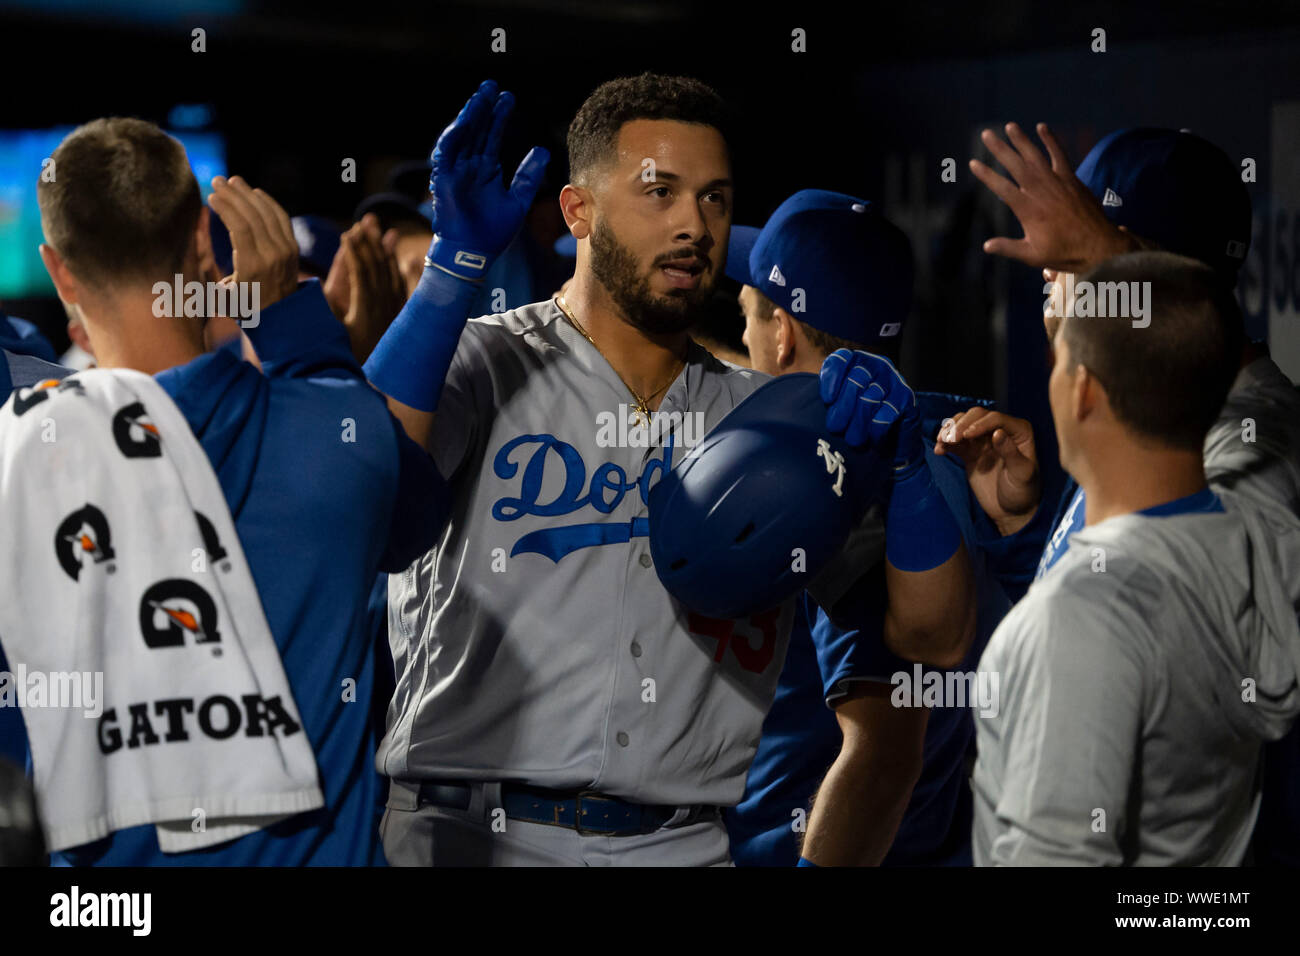 Queens, New York, USA. 13th Sep, 2019. Los Angeles Dodgers third baseman Edwin Rios (43) celebrates in the dugout after a home run during the game between The New York Mets and The Los Angeles Dodgers at Citi Field in Queens, New York. Mandatory credit: Kostas Lymperopoulos/CSM/Alamy Live News Stock Photo